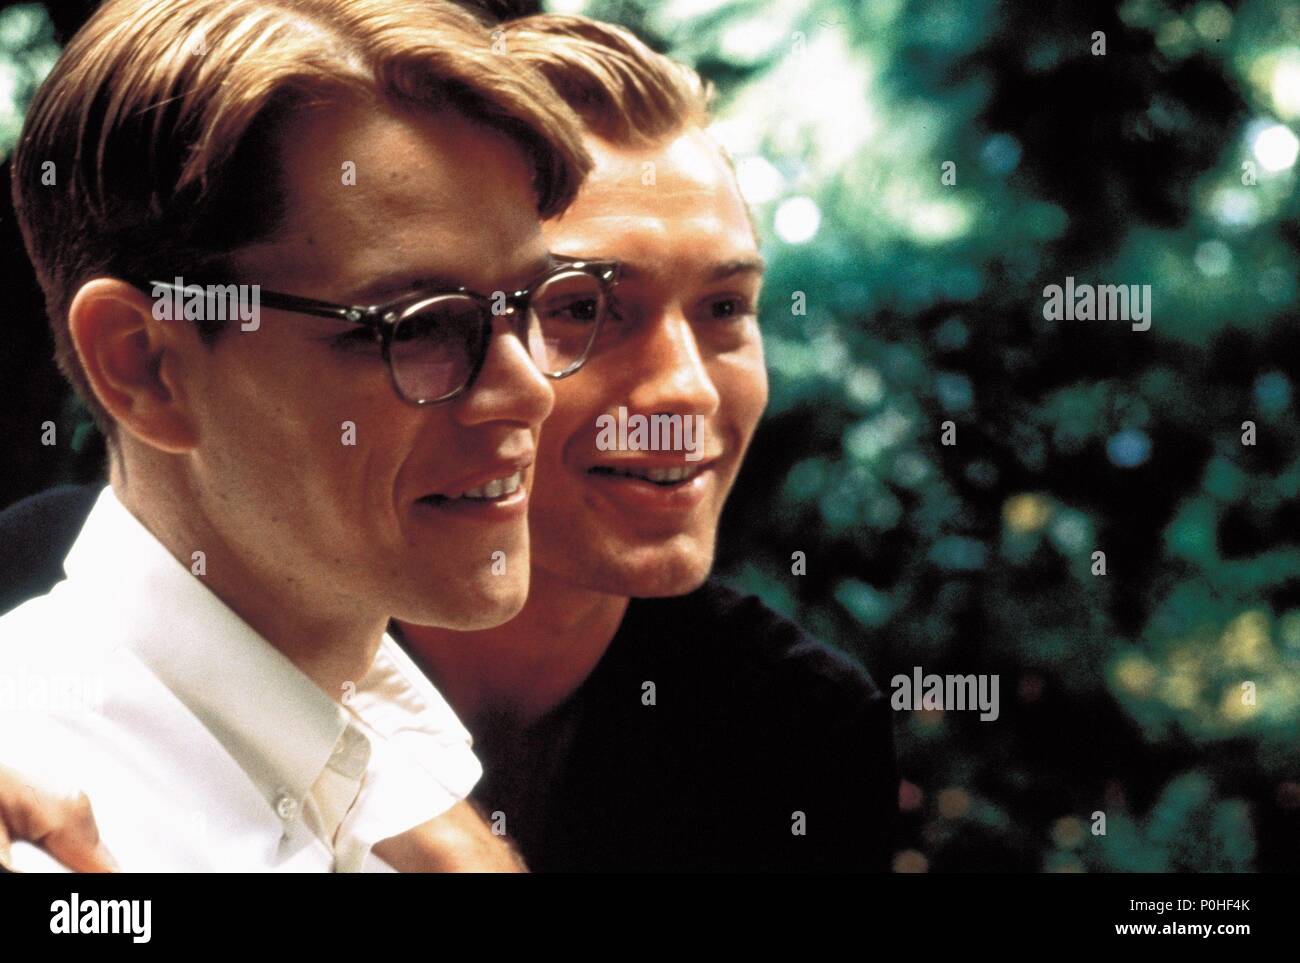 The Talented Mr Ripley – Golden Age Cinema and Bar